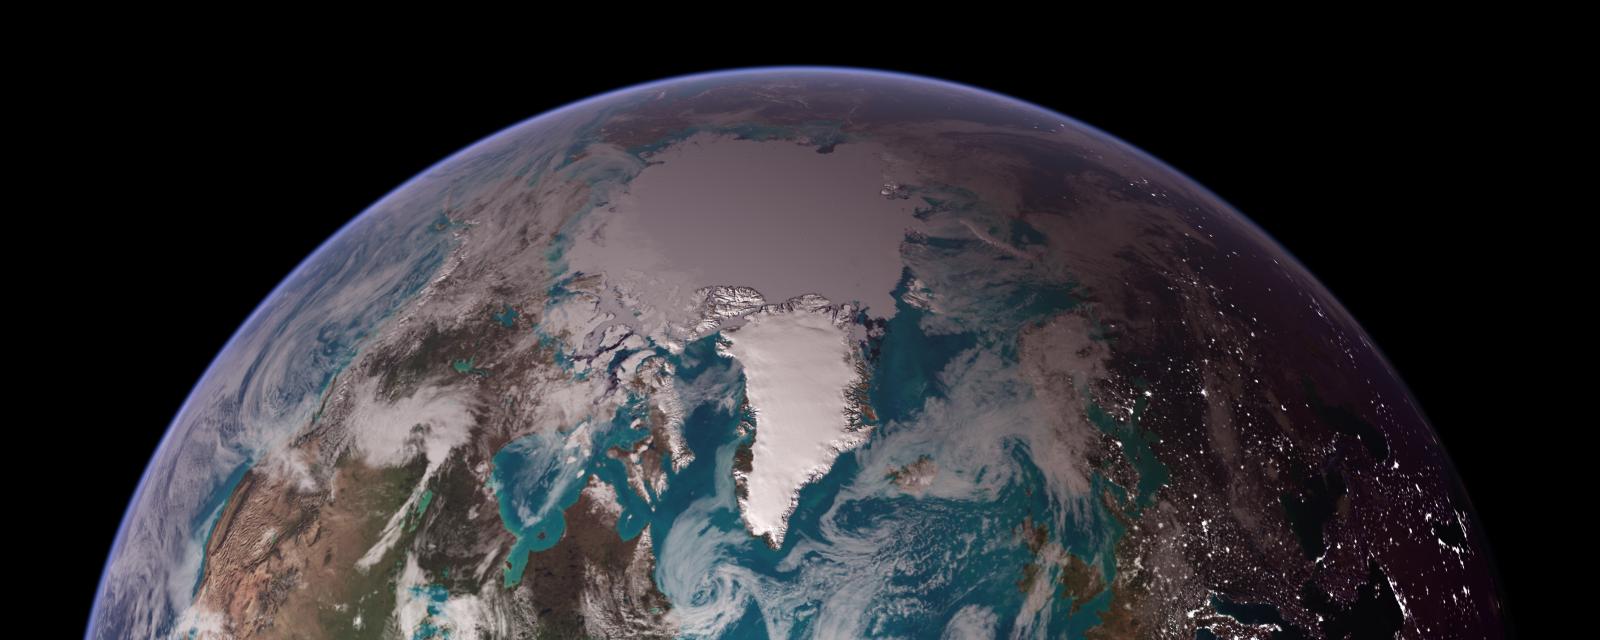 Bluemarble image of the Earth then from space by NASA